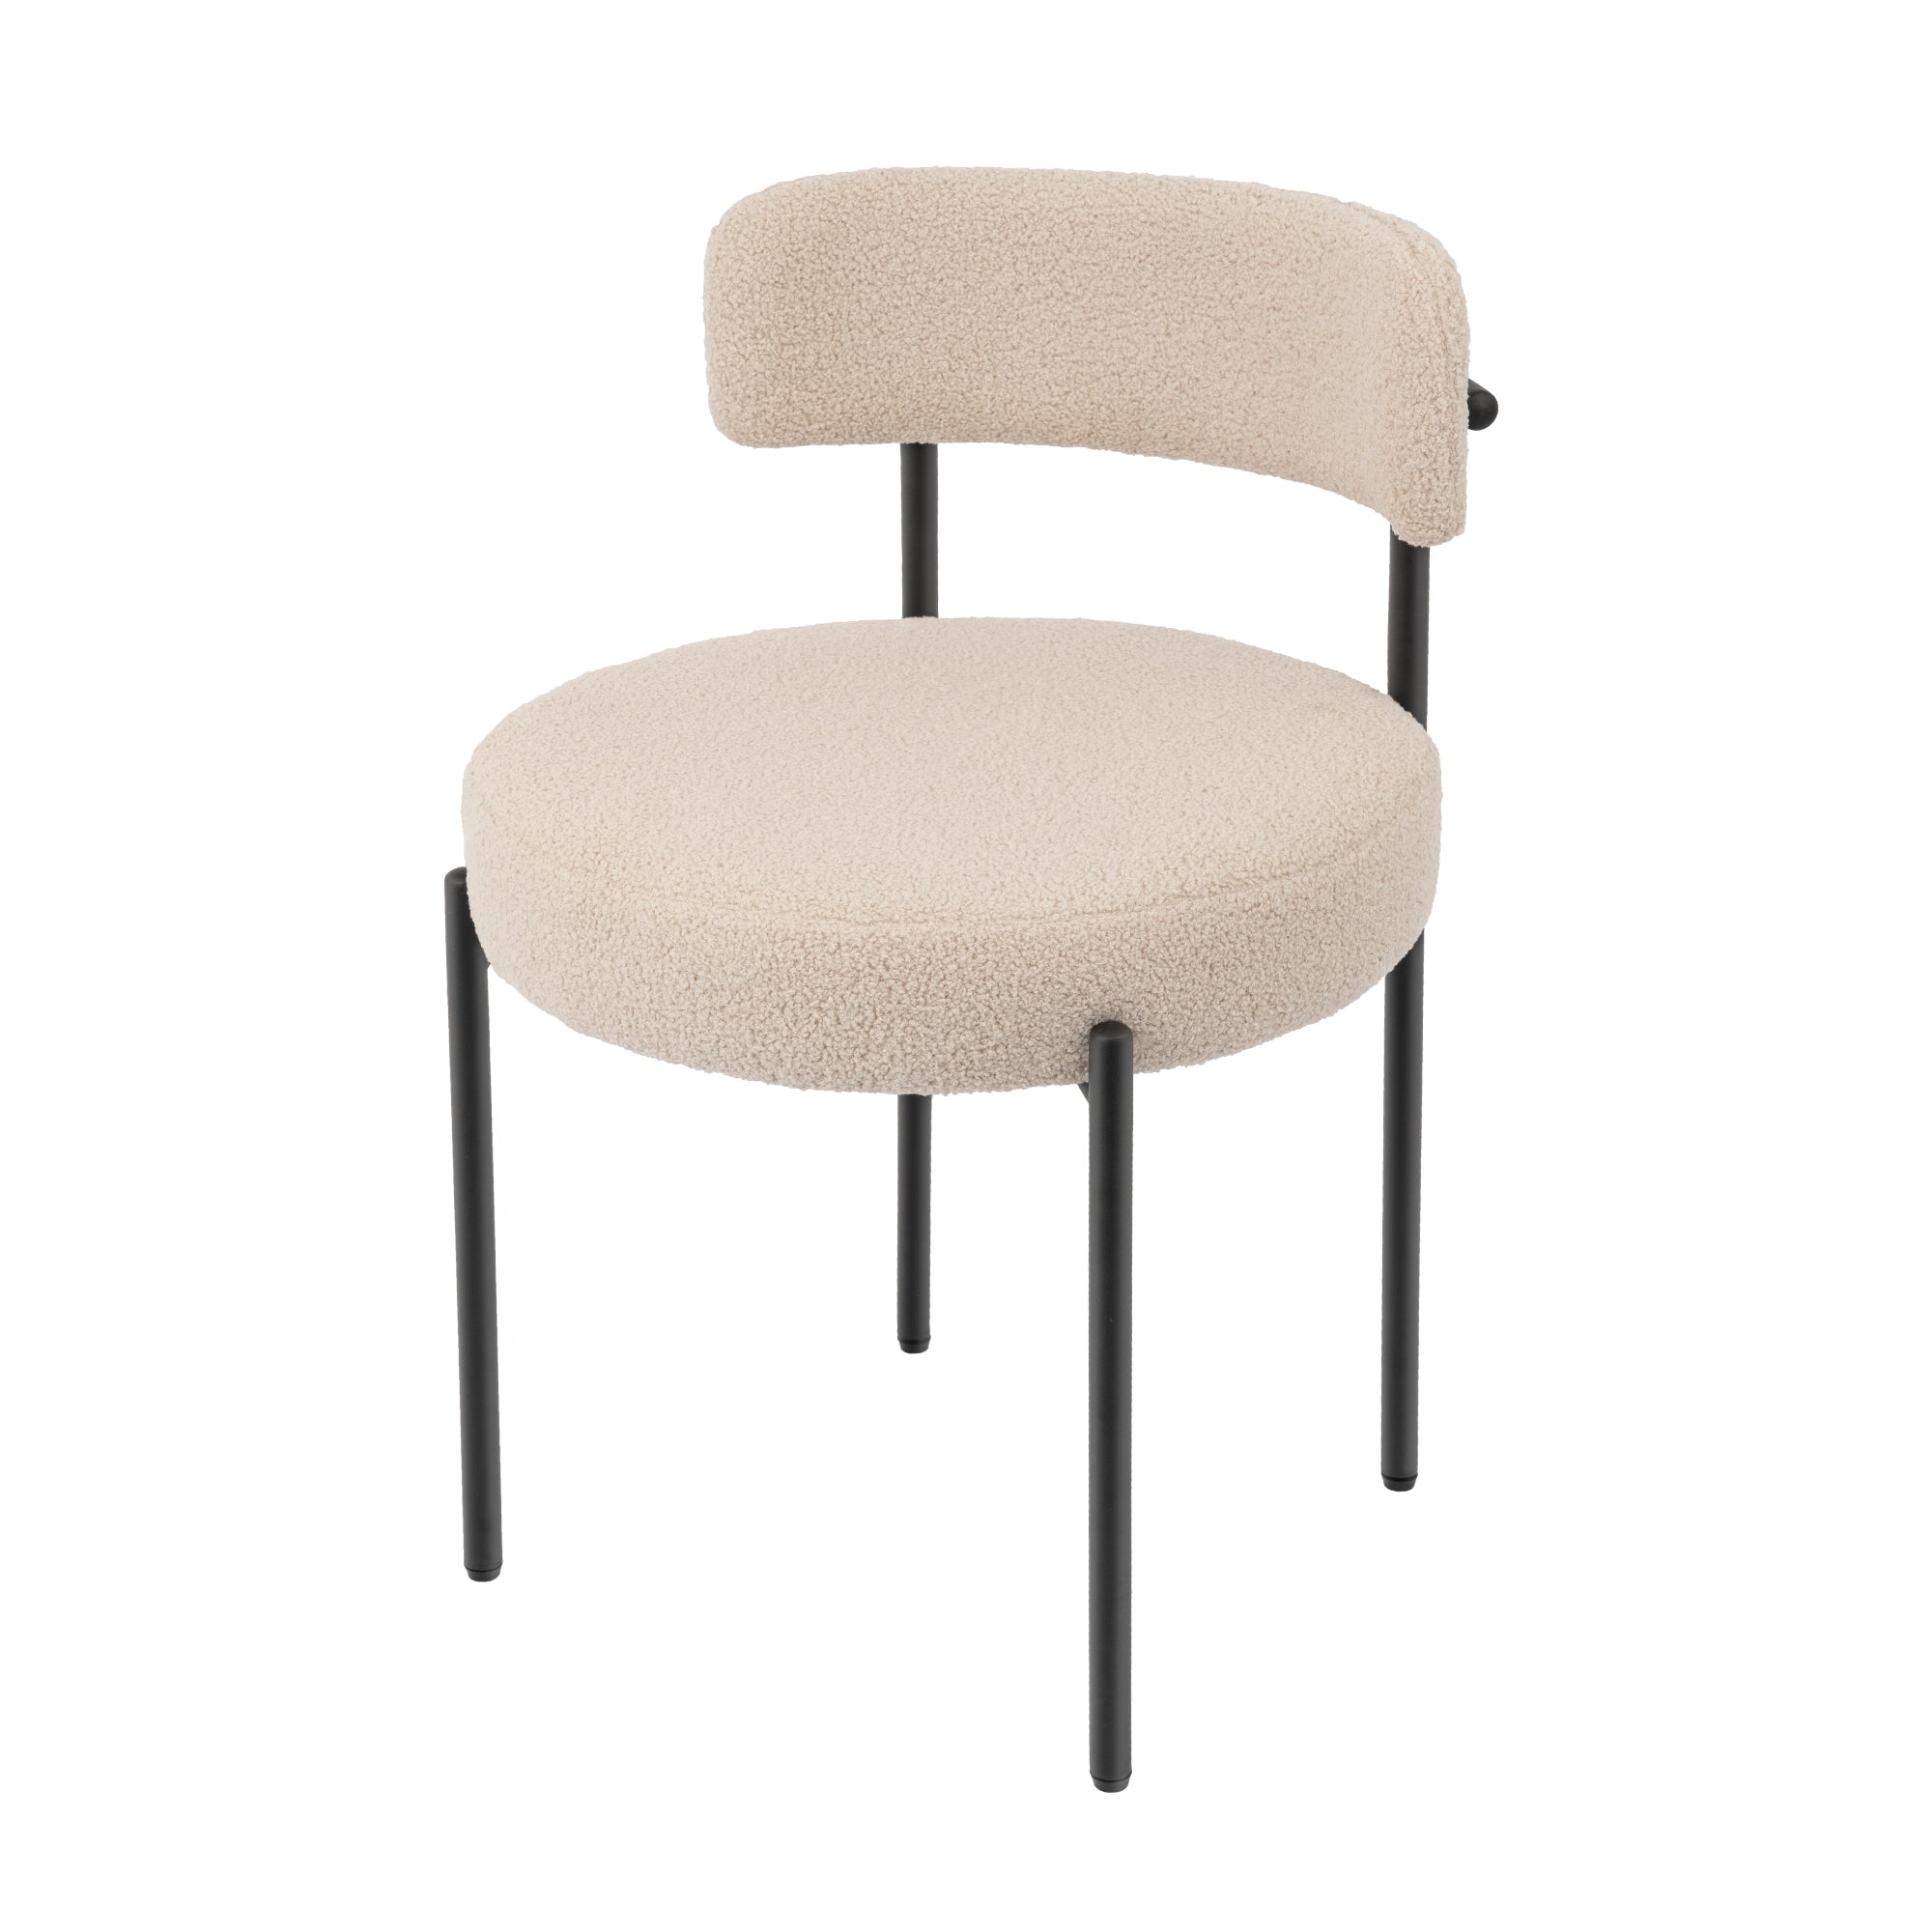 Upholstered Dining Chair Set With Backs